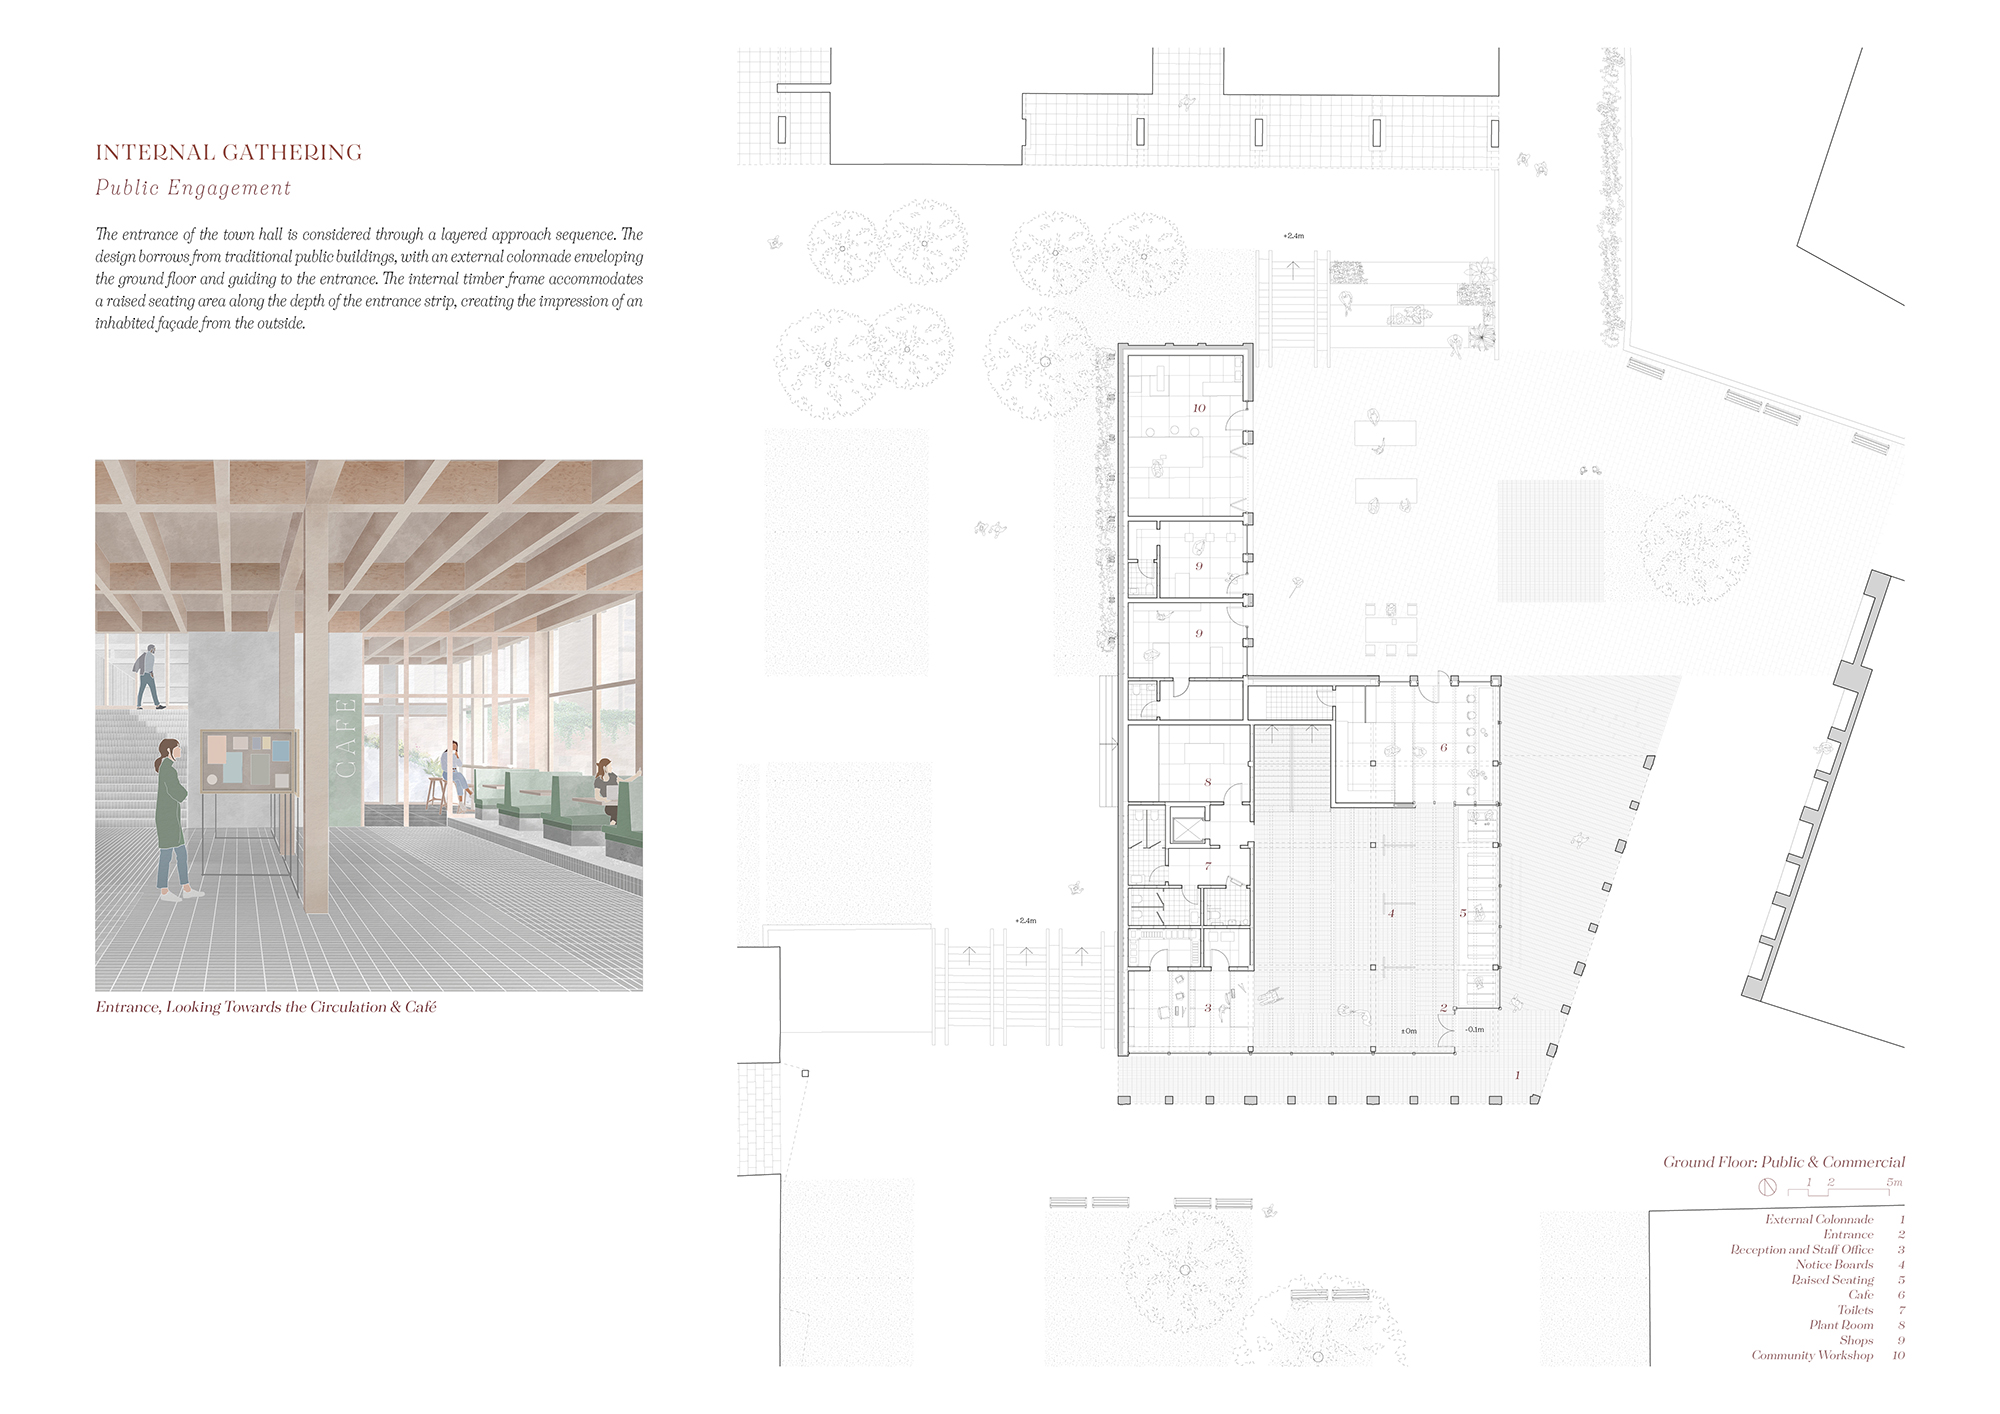 Page 7 of Inka Eismar winning entry to the A&DS and RIAS Scottish Student Awards. The board includes a site development plan for the public and commercial ground floor and a architectural illustration of the entrance.